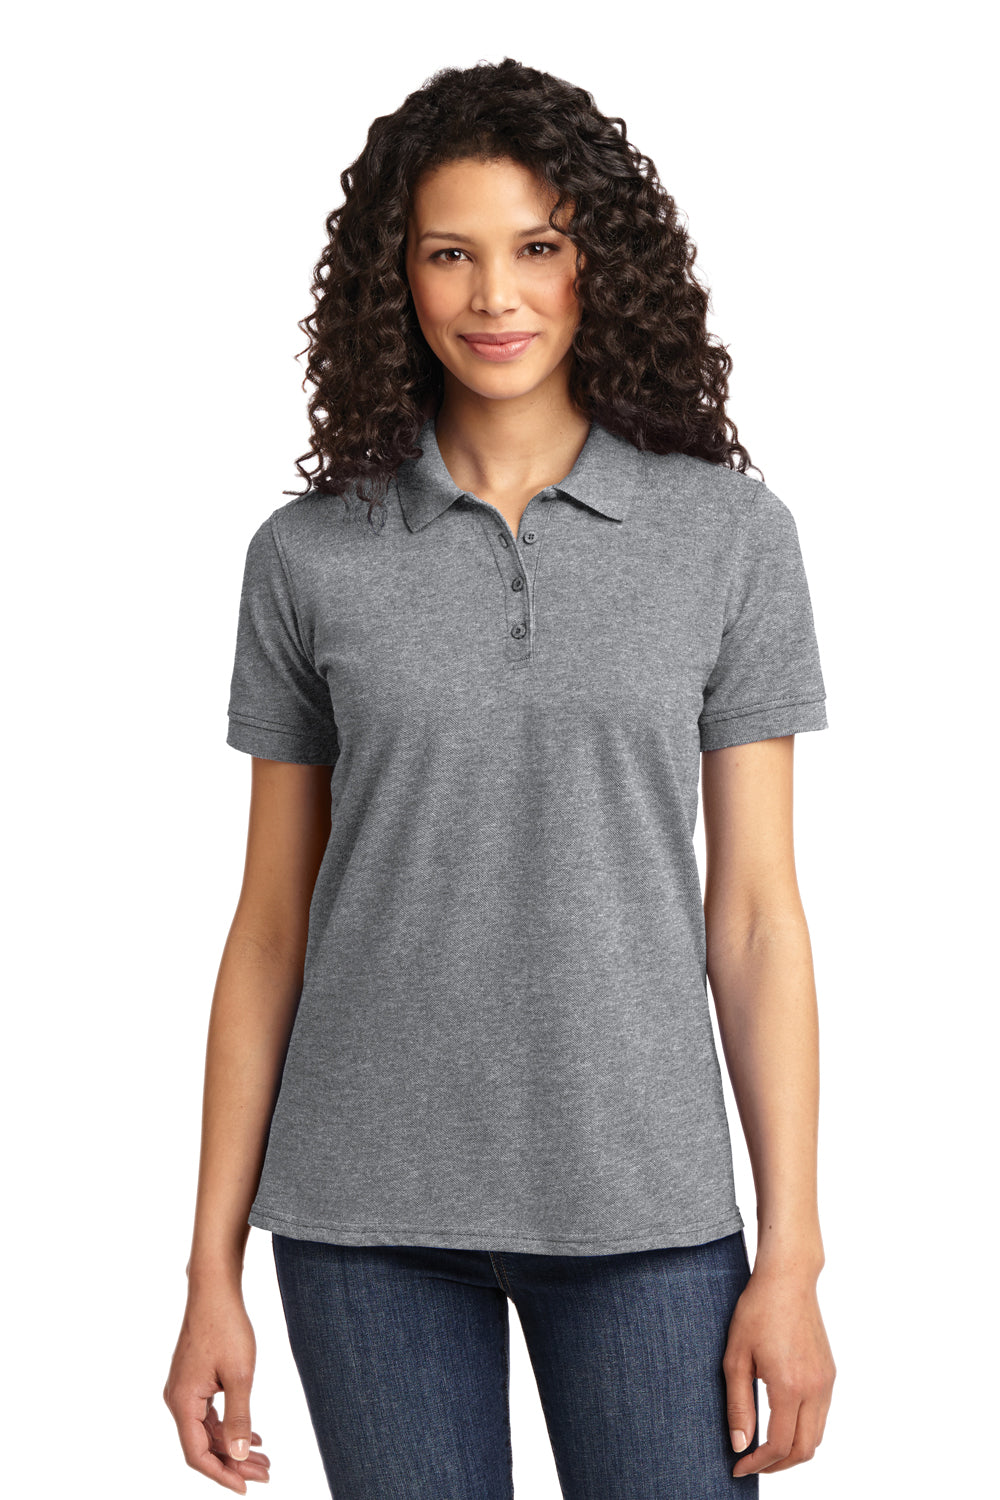 Port & Company LKP155 Womens Core Stain Resistant Short Sleeve Polo Shirt Heather Grey Front